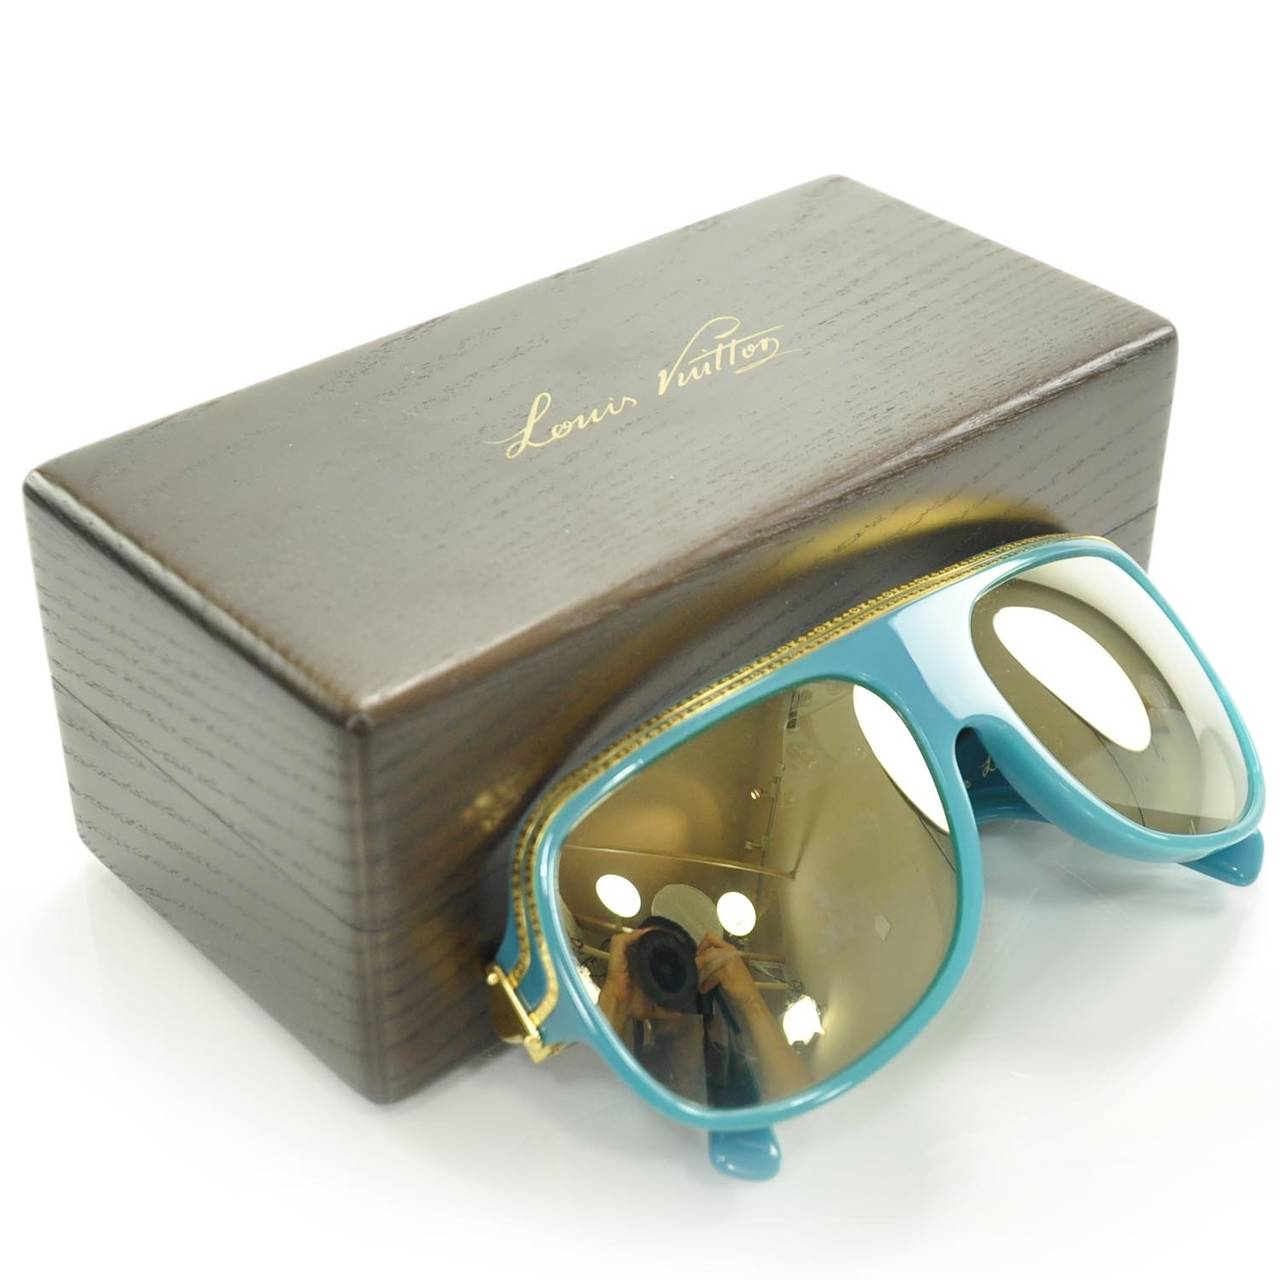 This is an authentic pair of LOUIS VUITTON Millionaire Sunglasses Turquoise w Gold Plated Lenses LE. These fabulous retro style sunglasses are turquoise with gold trim engraved with small Louis Vuitton LV logos. The large squared lenses have a tint